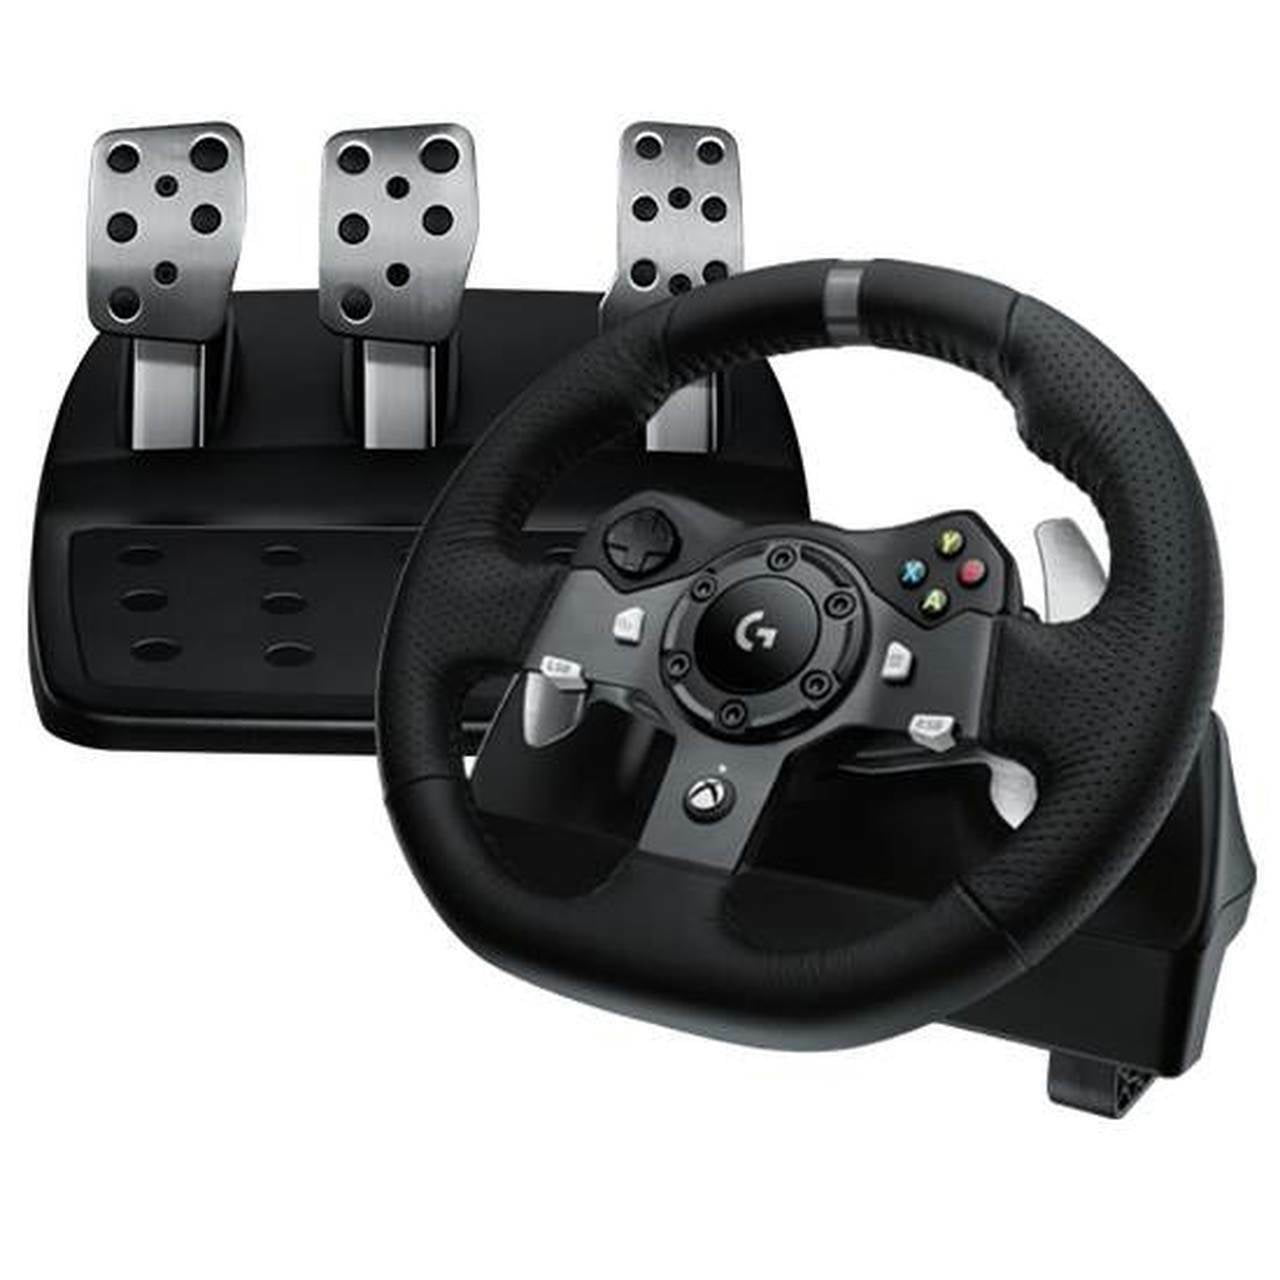 Logitech G920 Xbox Driving Force Racing Wheel for Xbox One and PC